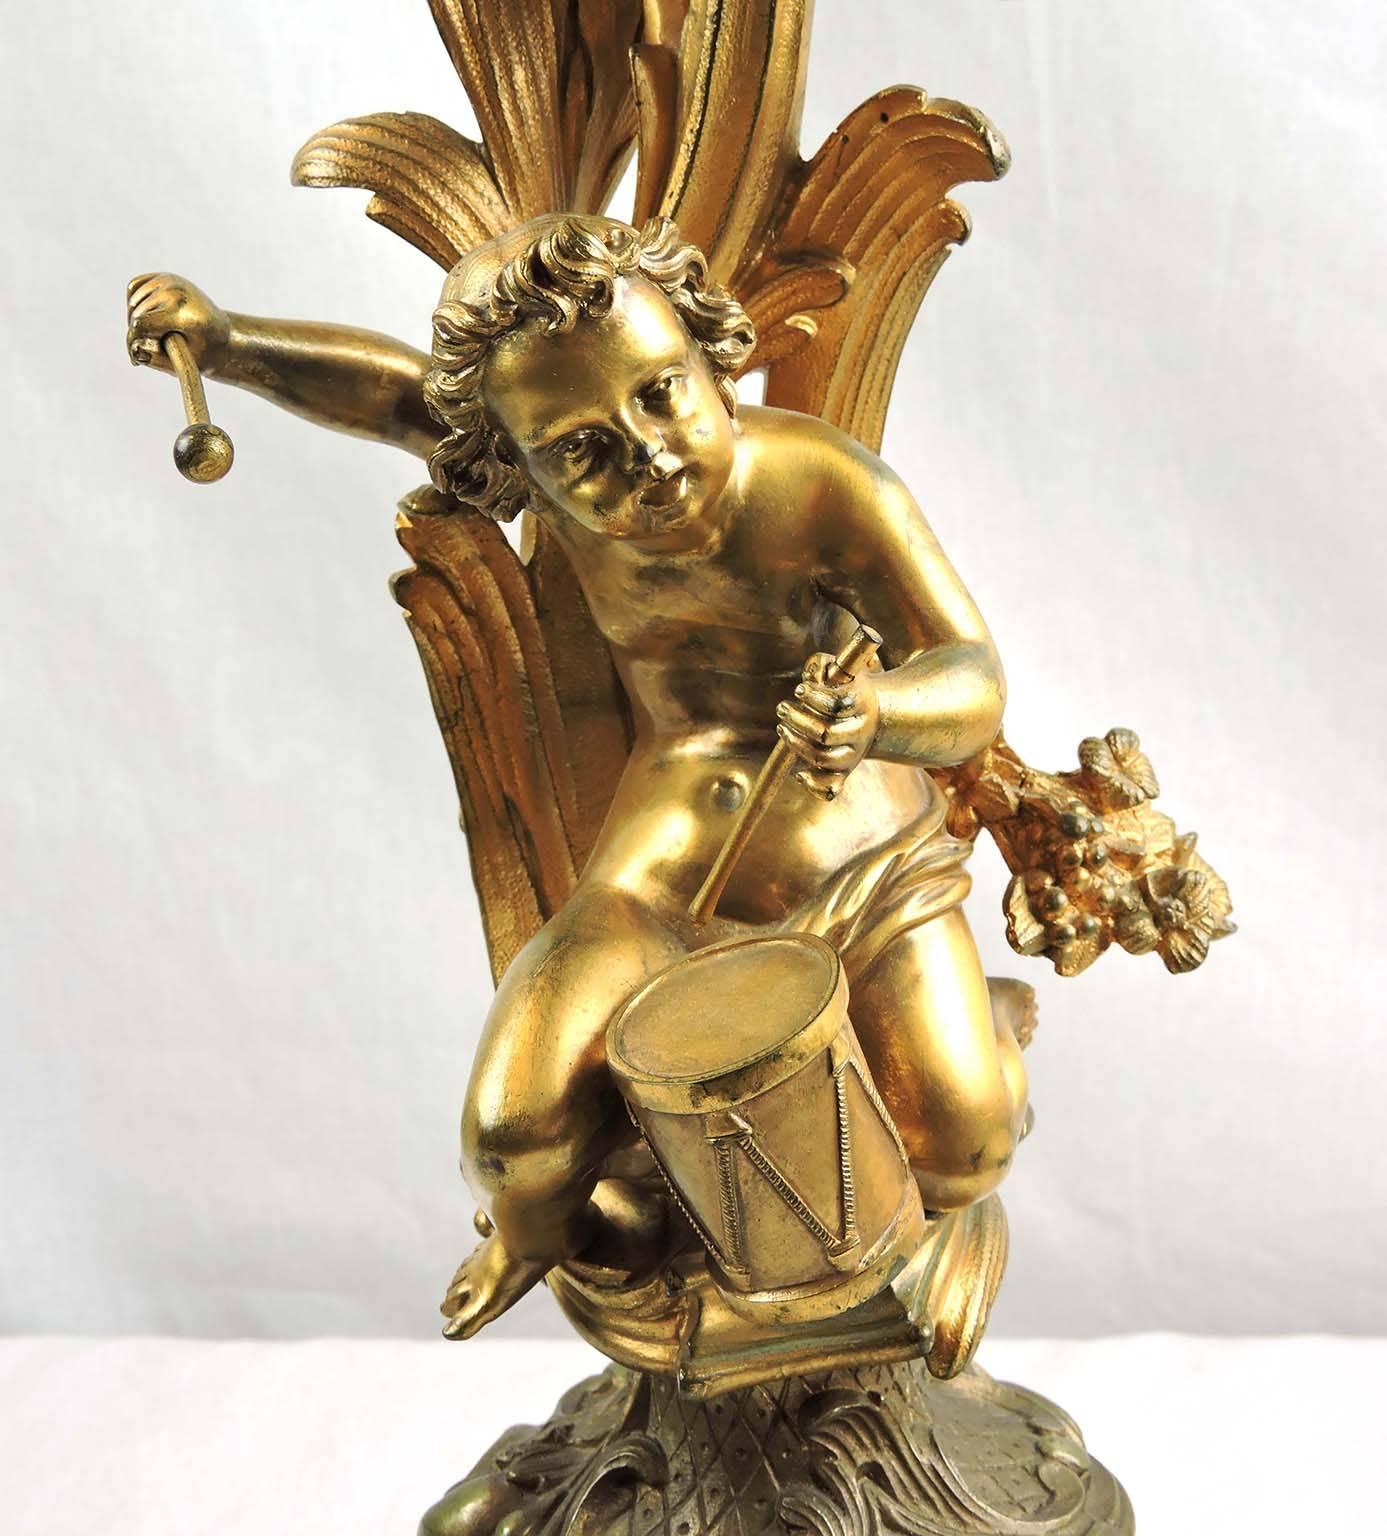 A pair of centre, thread-mounted gilt bronze Rococo candelabra, the foliate curvilinear shafts each ornamented with a seated cupid musician and sprays of flowers and issuing six, torsed, foliate arms, topped with goblet-shaped candleholders,